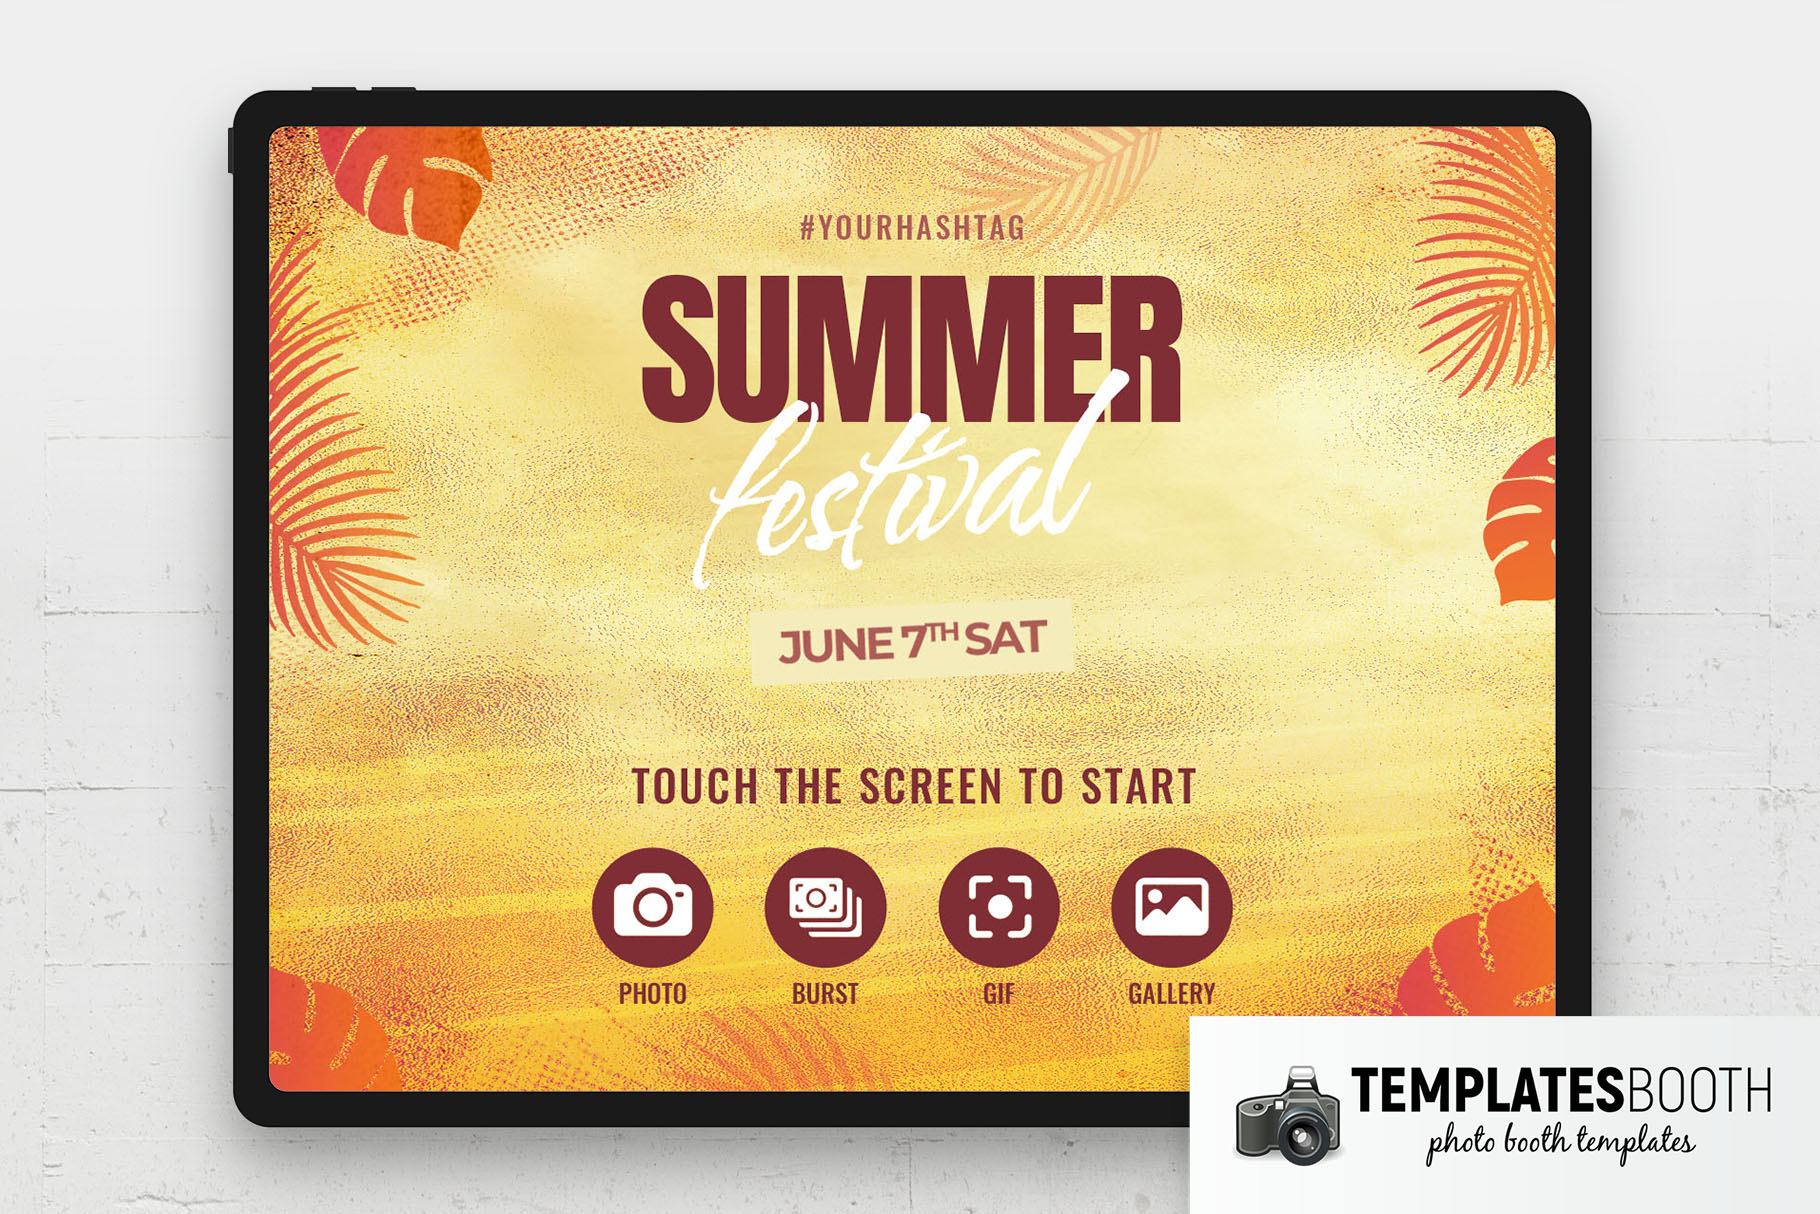 Summer Festival Photo Booth Welcome Screen